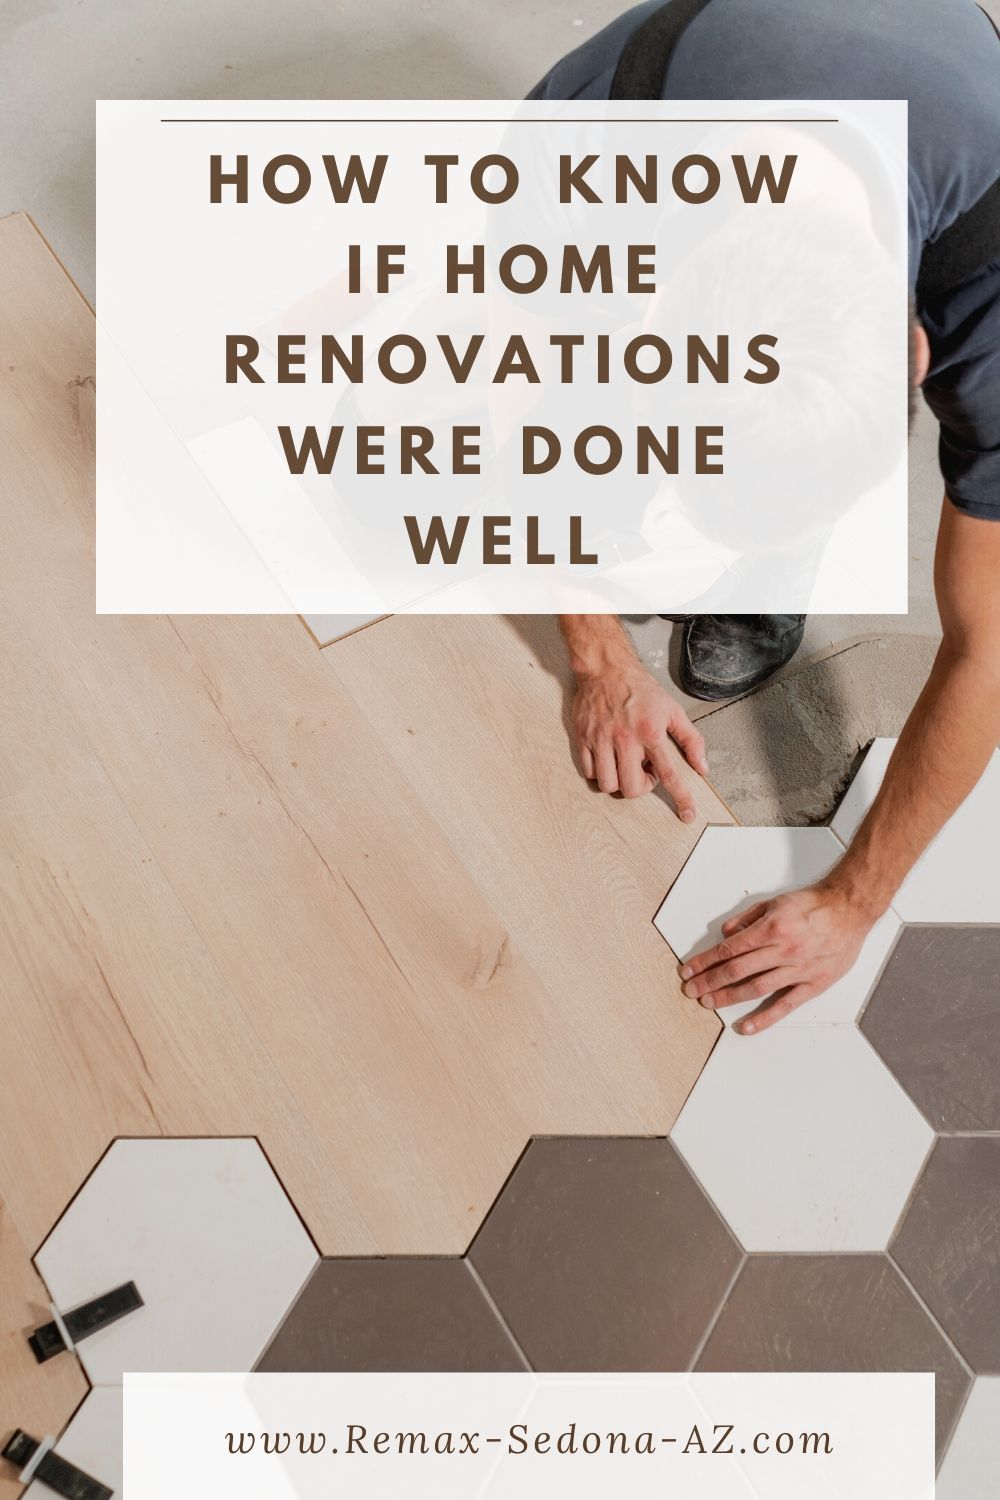 How to Know if Home Renovations Were Done Well